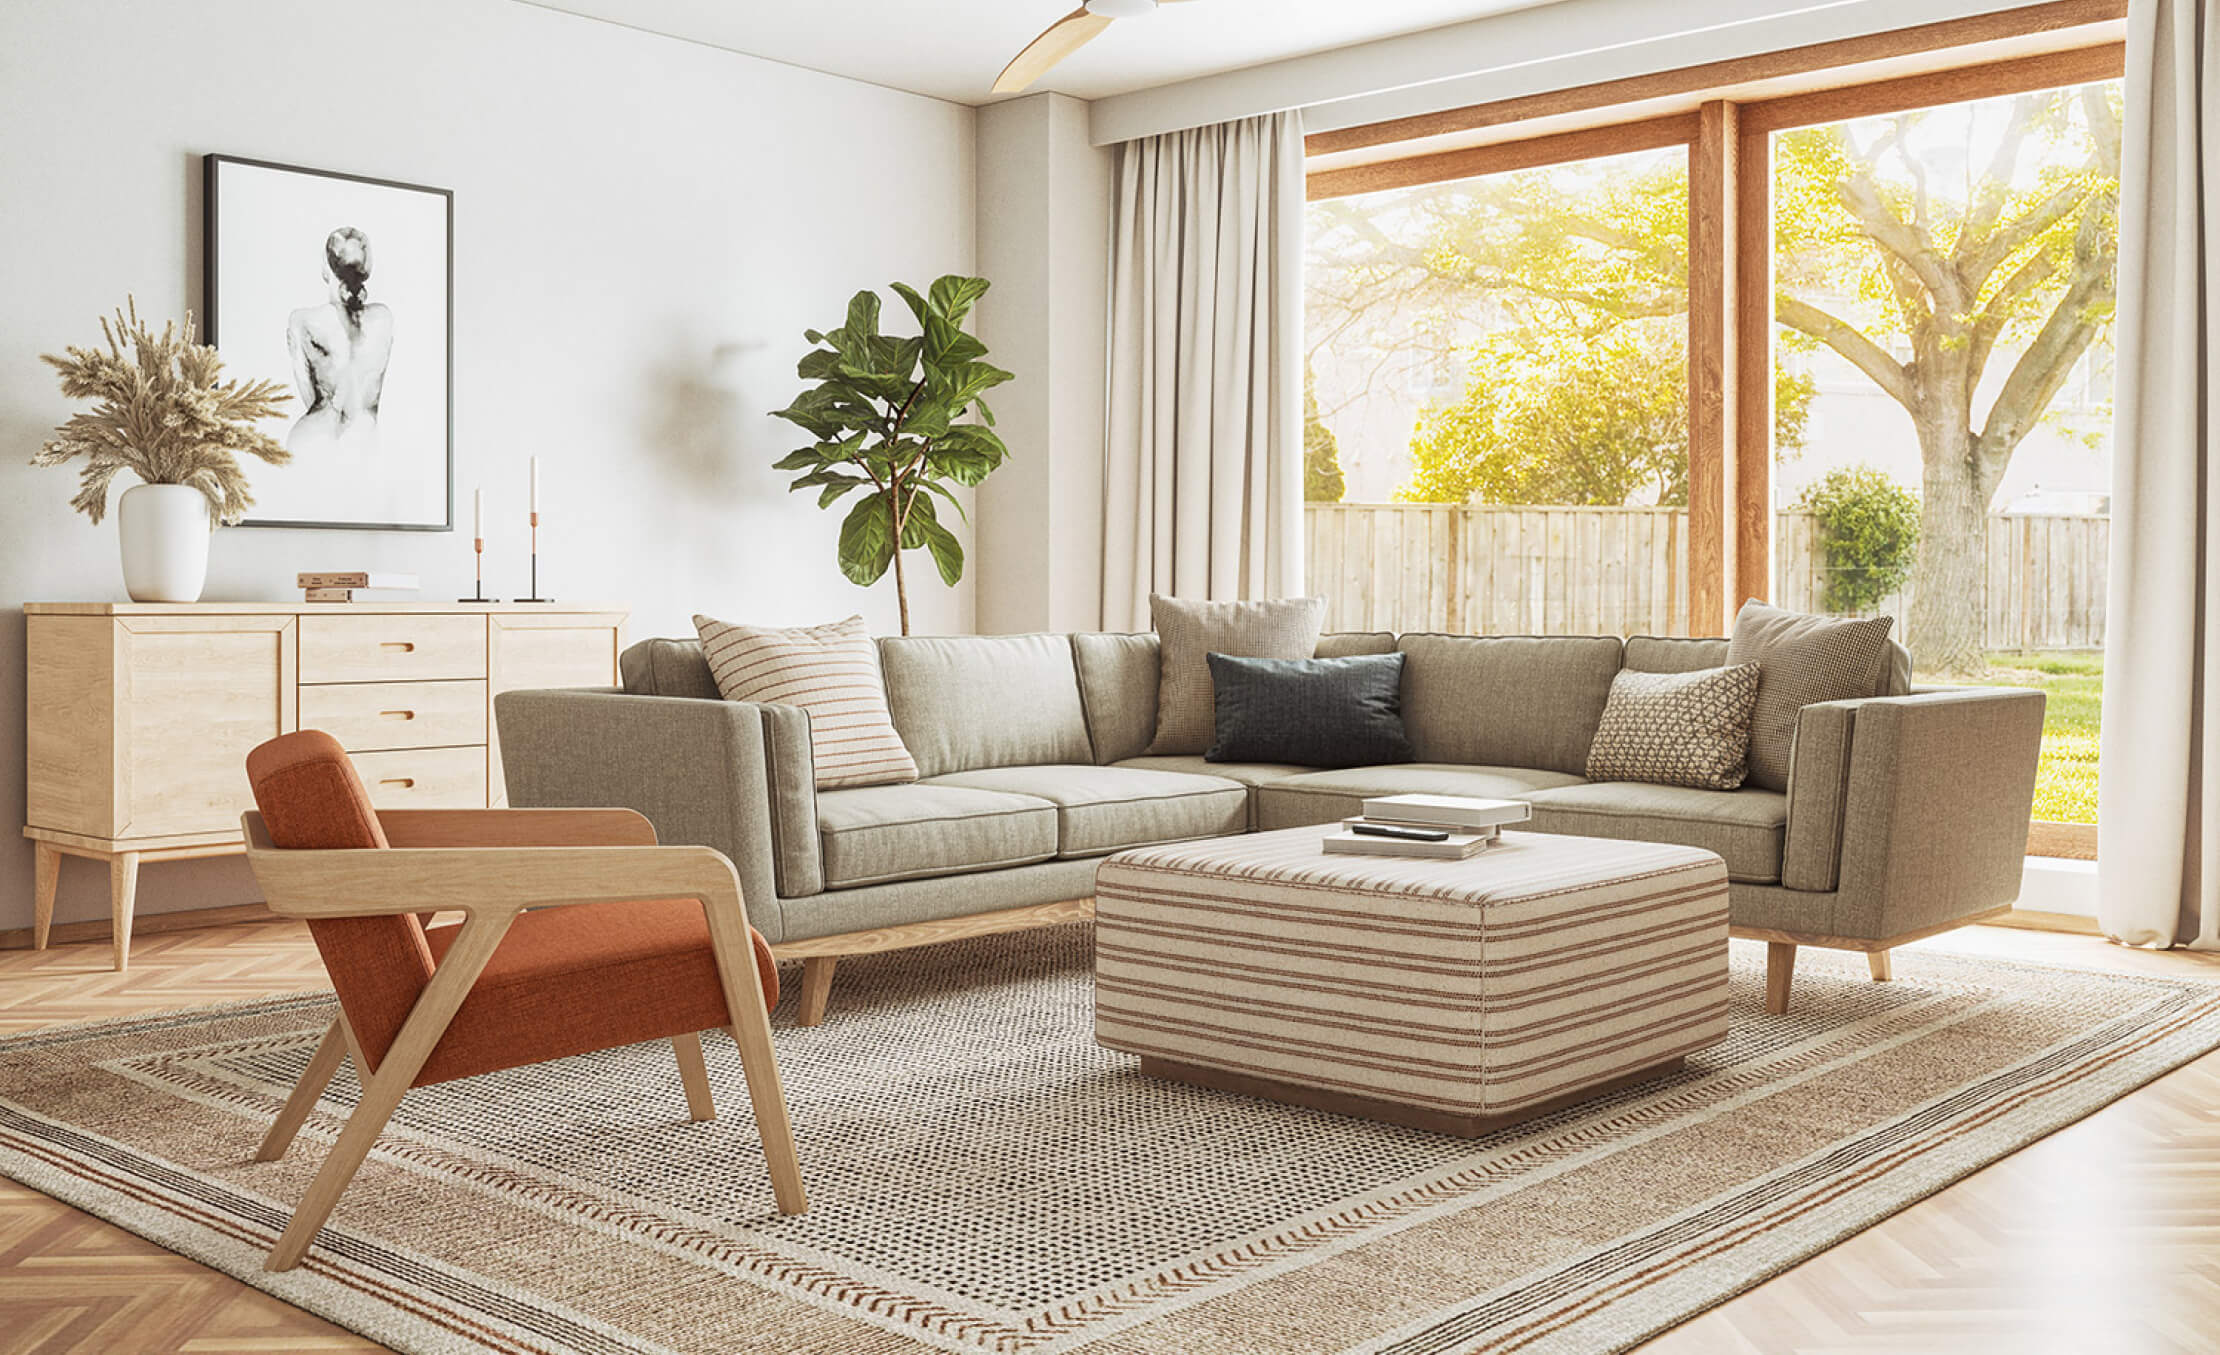 IRL: Shown in Maple wood with the Kirnik Corner Sectional in Smart Smoke fabric, Burr Accent Chair, Harlan Ottoman, and Lulu + Judge Throw Pillows